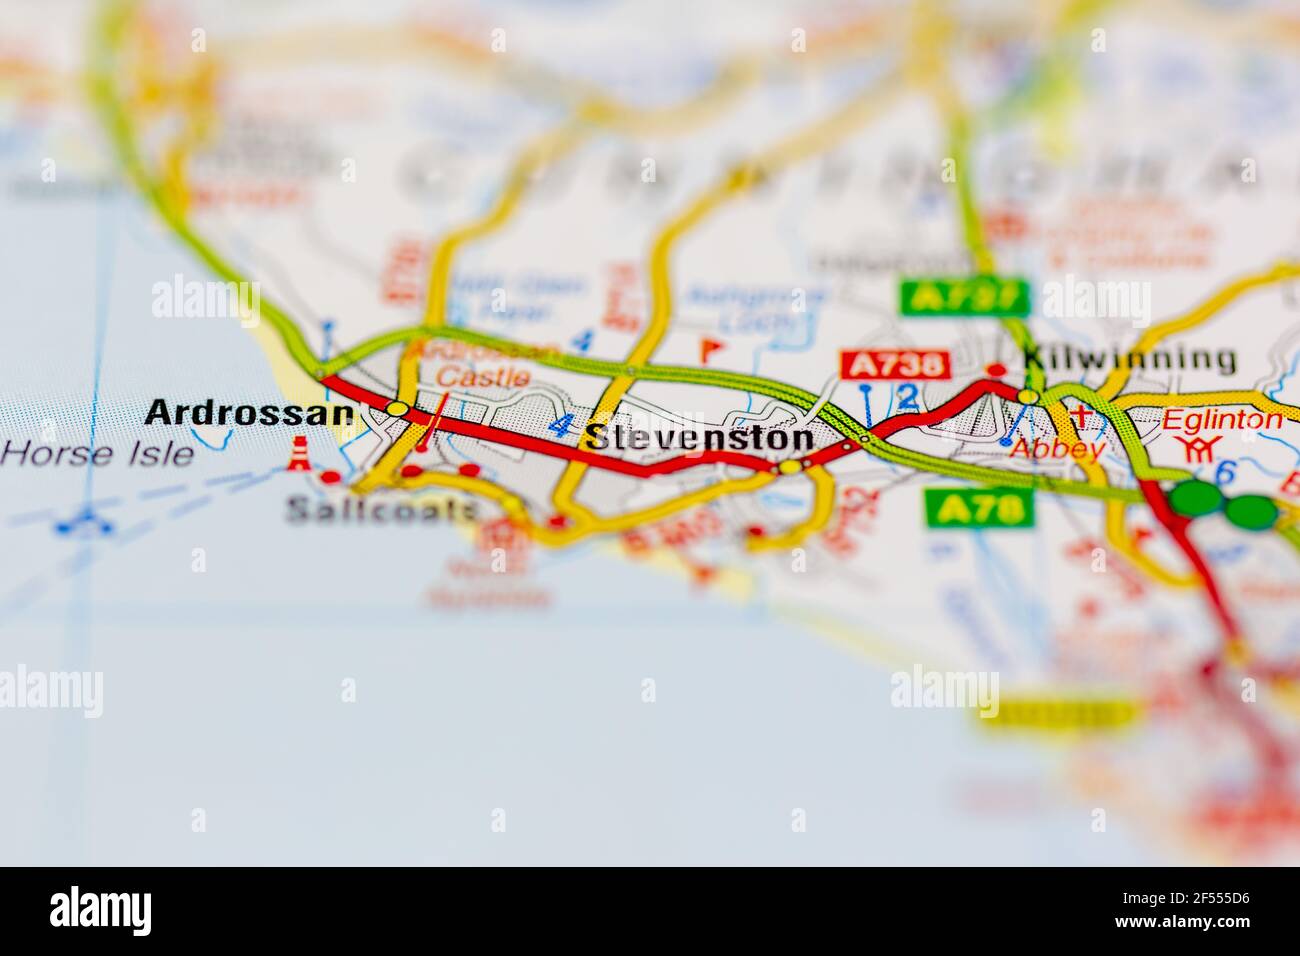 Stevenston Shown on a Geography map or road map Stock Photo